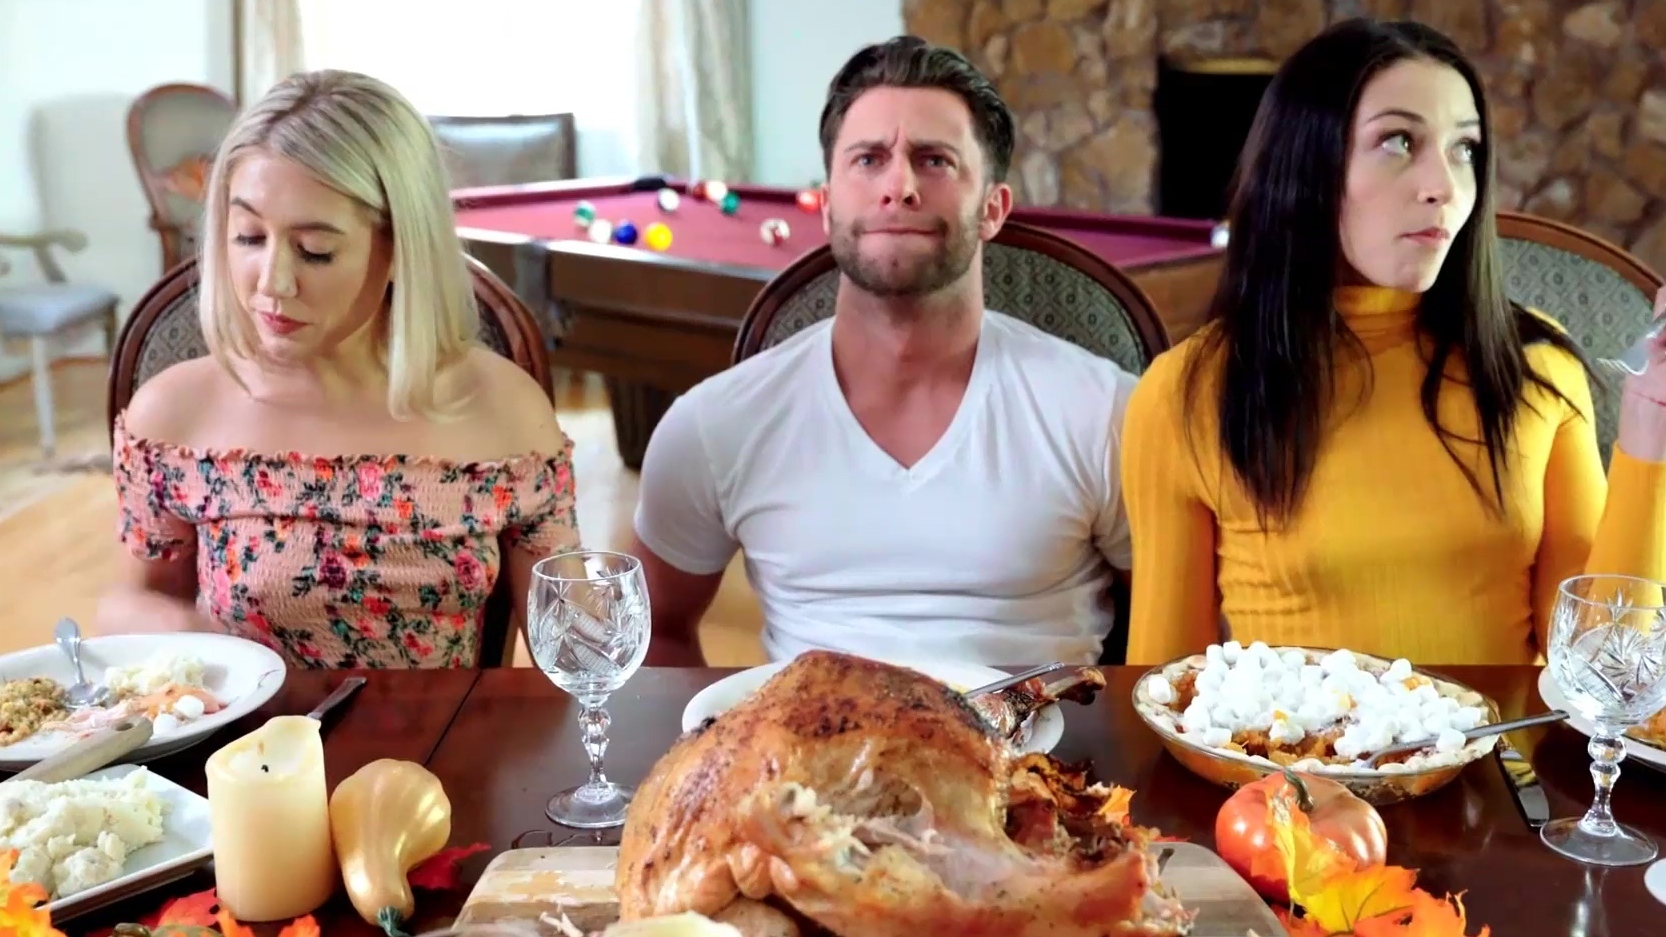 Wild handjob from brunette and blonde stepsisters during Thanksgiving dinner photo pic